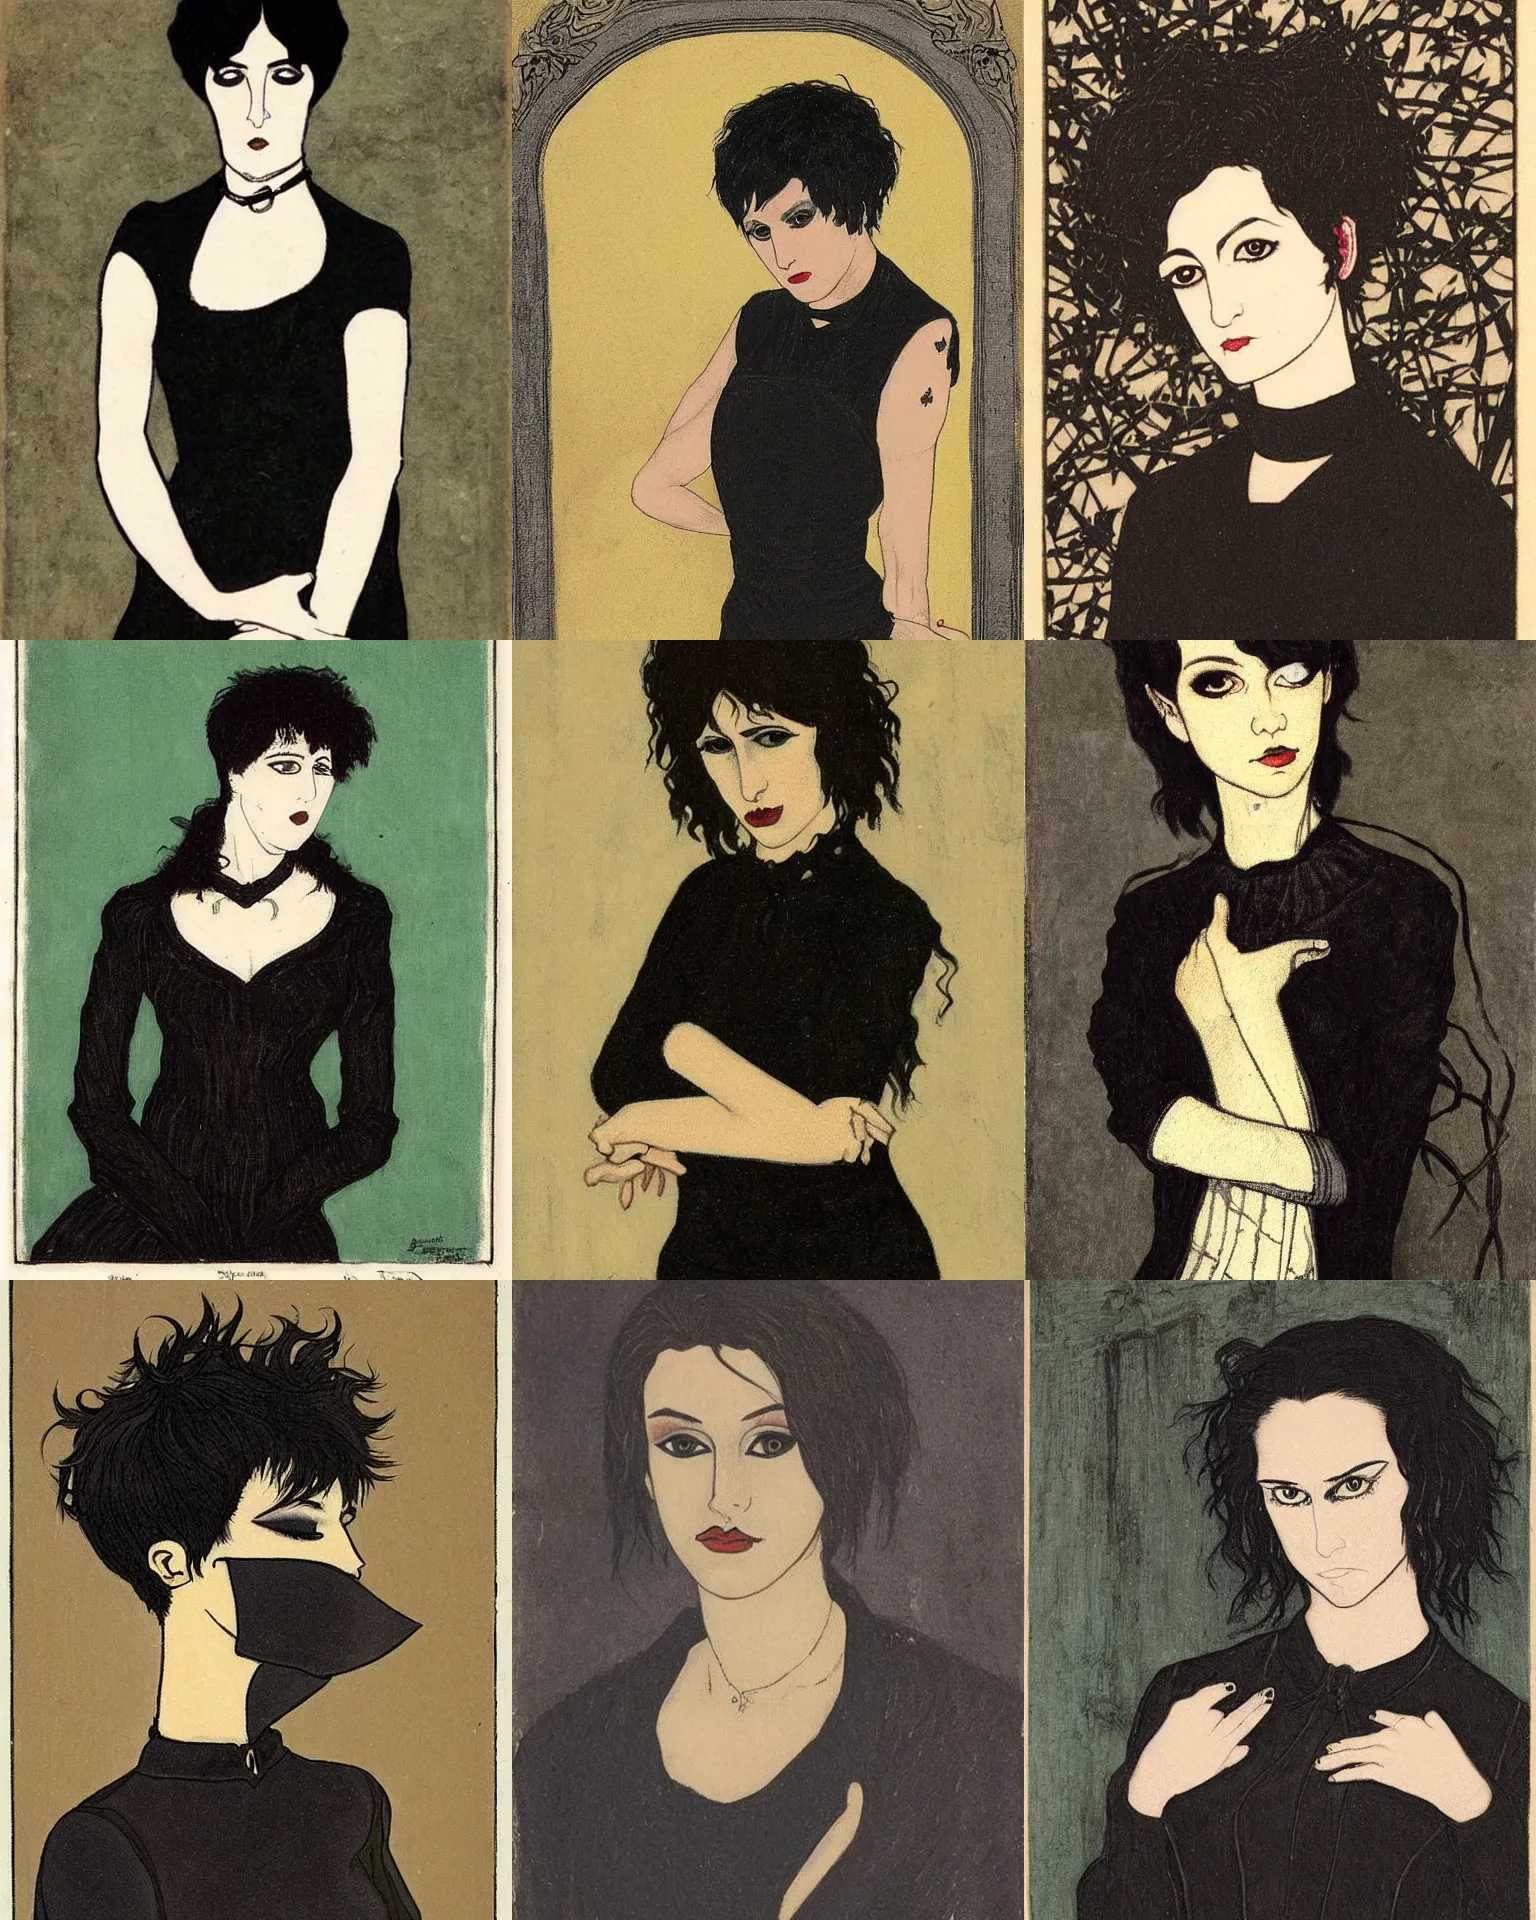 Prompt: A goth portrait by Eugène Grasset. Her hair is dark brown and cut into a short, messy pixie cut. She has a slightly rounded face, with a pointed chin, large entirely-black eyes, and a small nose. She is wearing a black tank top, a black leather jacket, a black knee-length skirt, a black choker, and black leather boots.